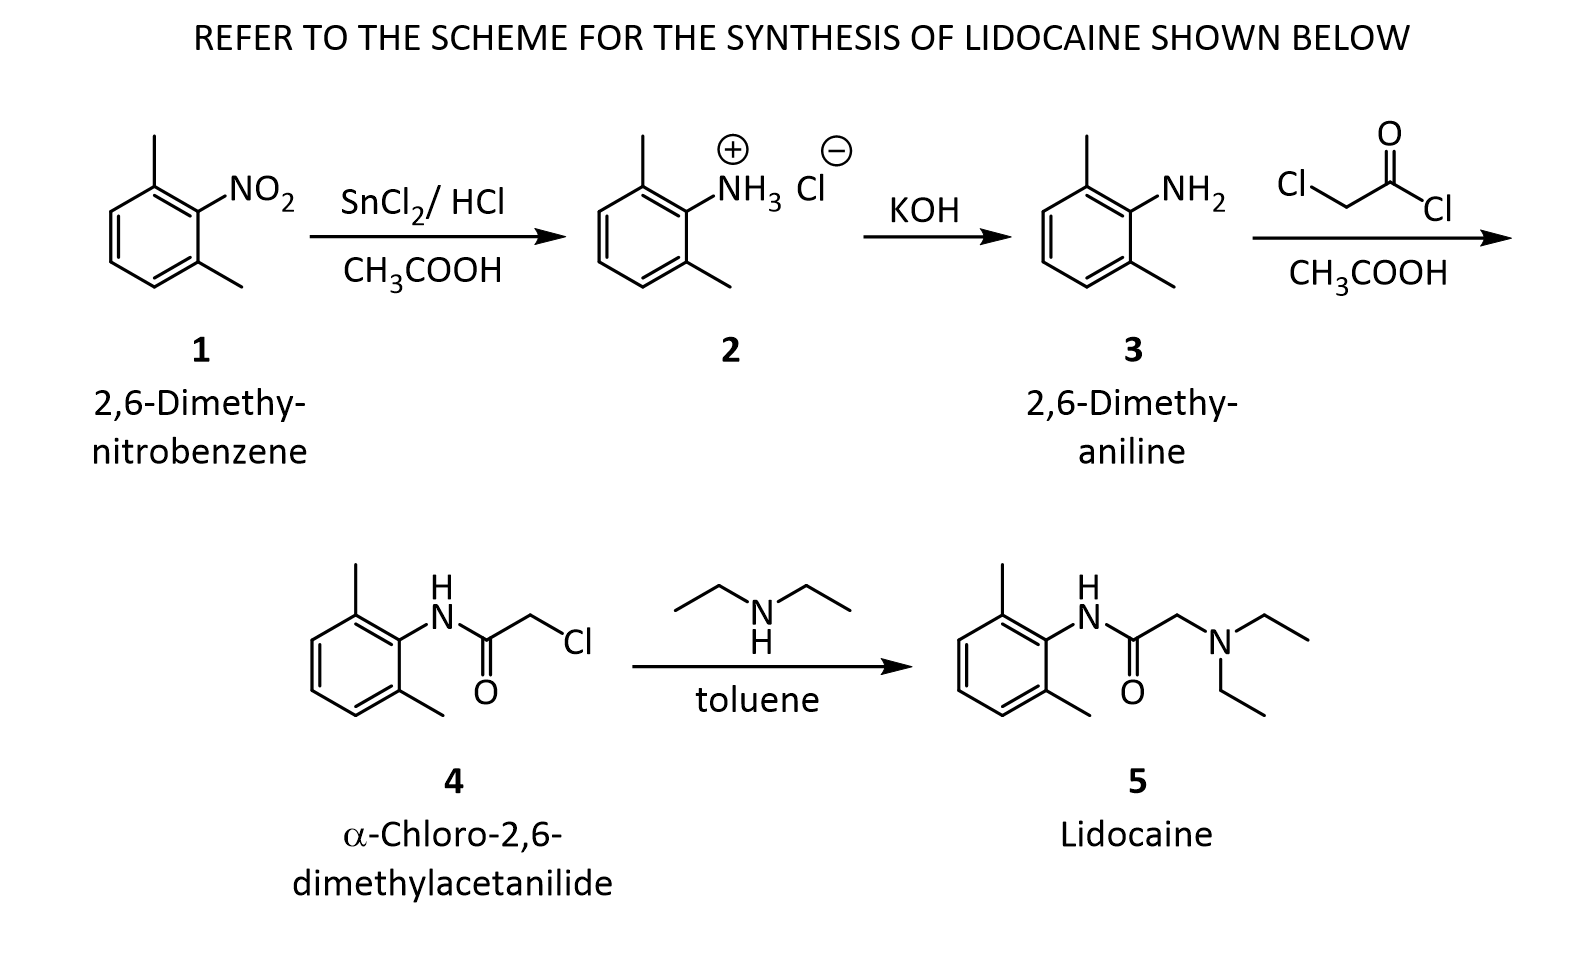 REFER TO THE SCHEME FOR THE SYNTHESIS OF LIDOCAINE SHOWN BELOW © NH, CI q NH2 avec NO2 SnCl2/ HCI CH3COOH KOH CH3COOH 2 3 1 2